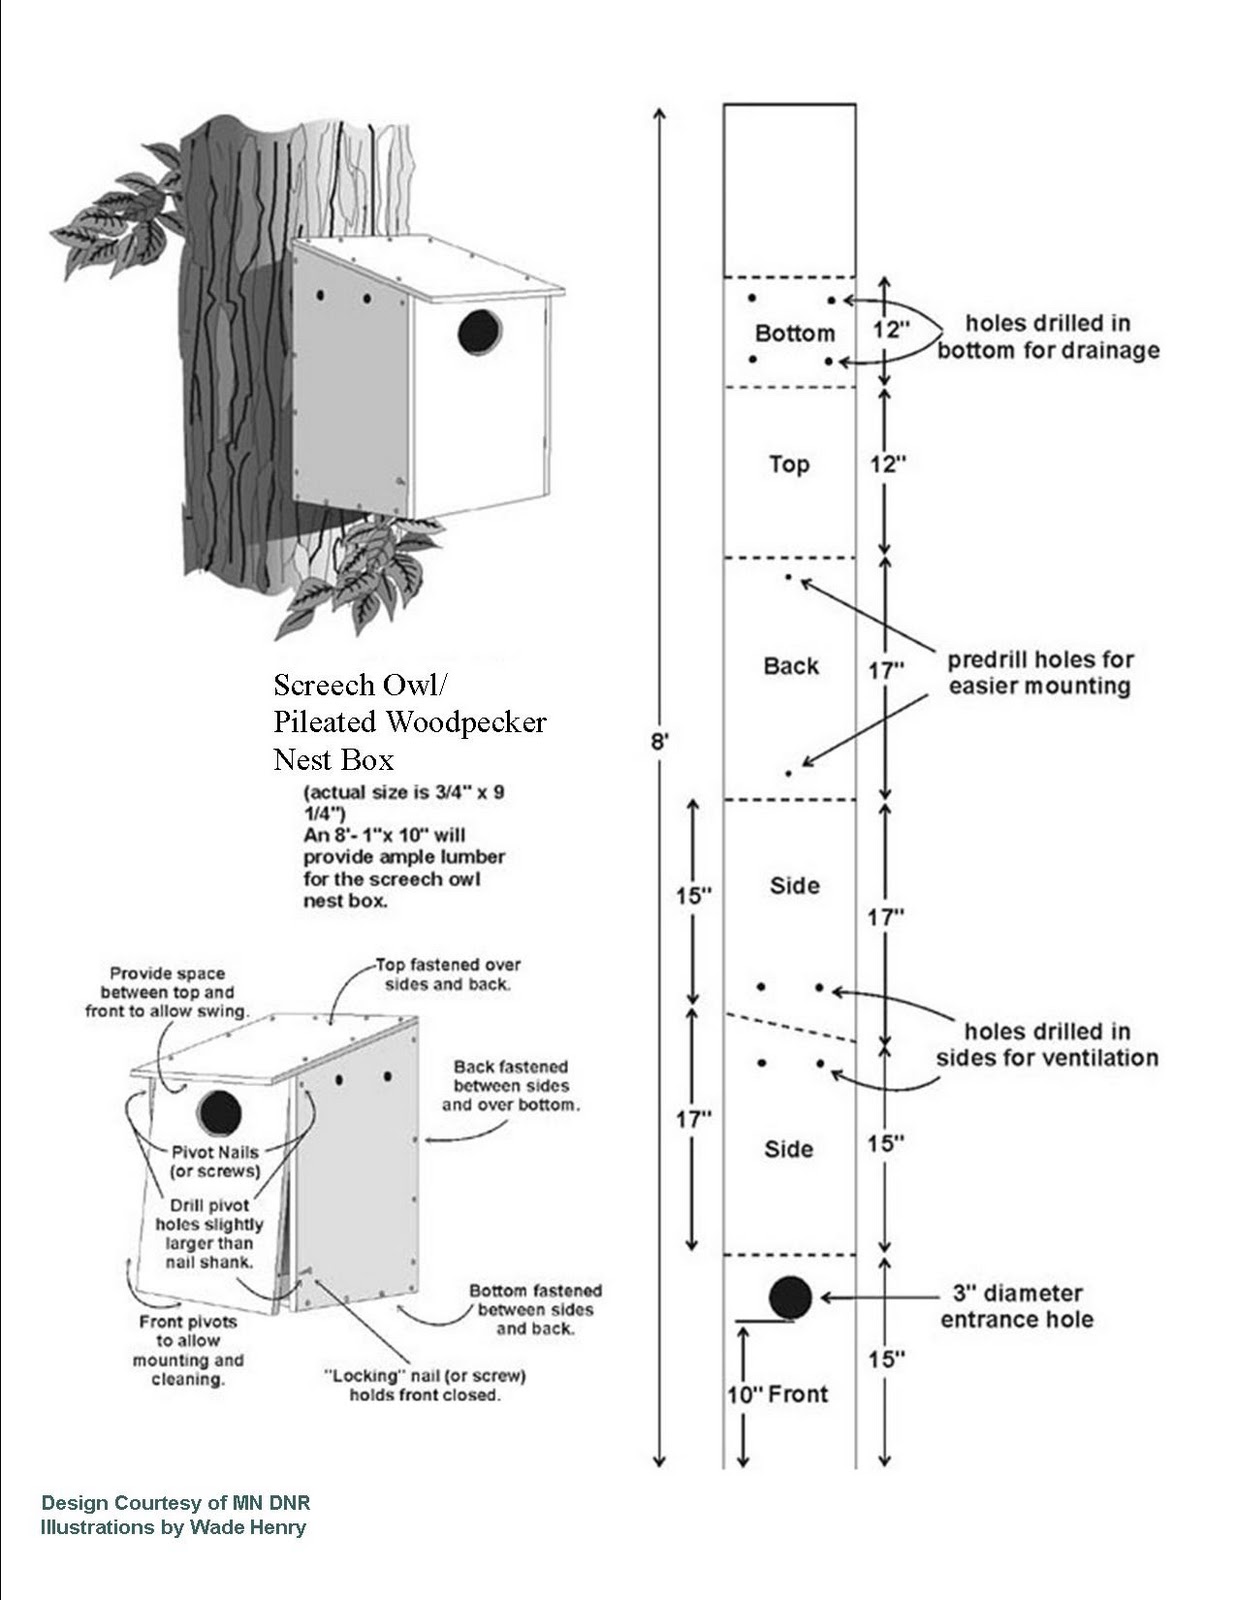 Wild Birds Unlimited: Is There a Pileated Woodpecker Nest Box?